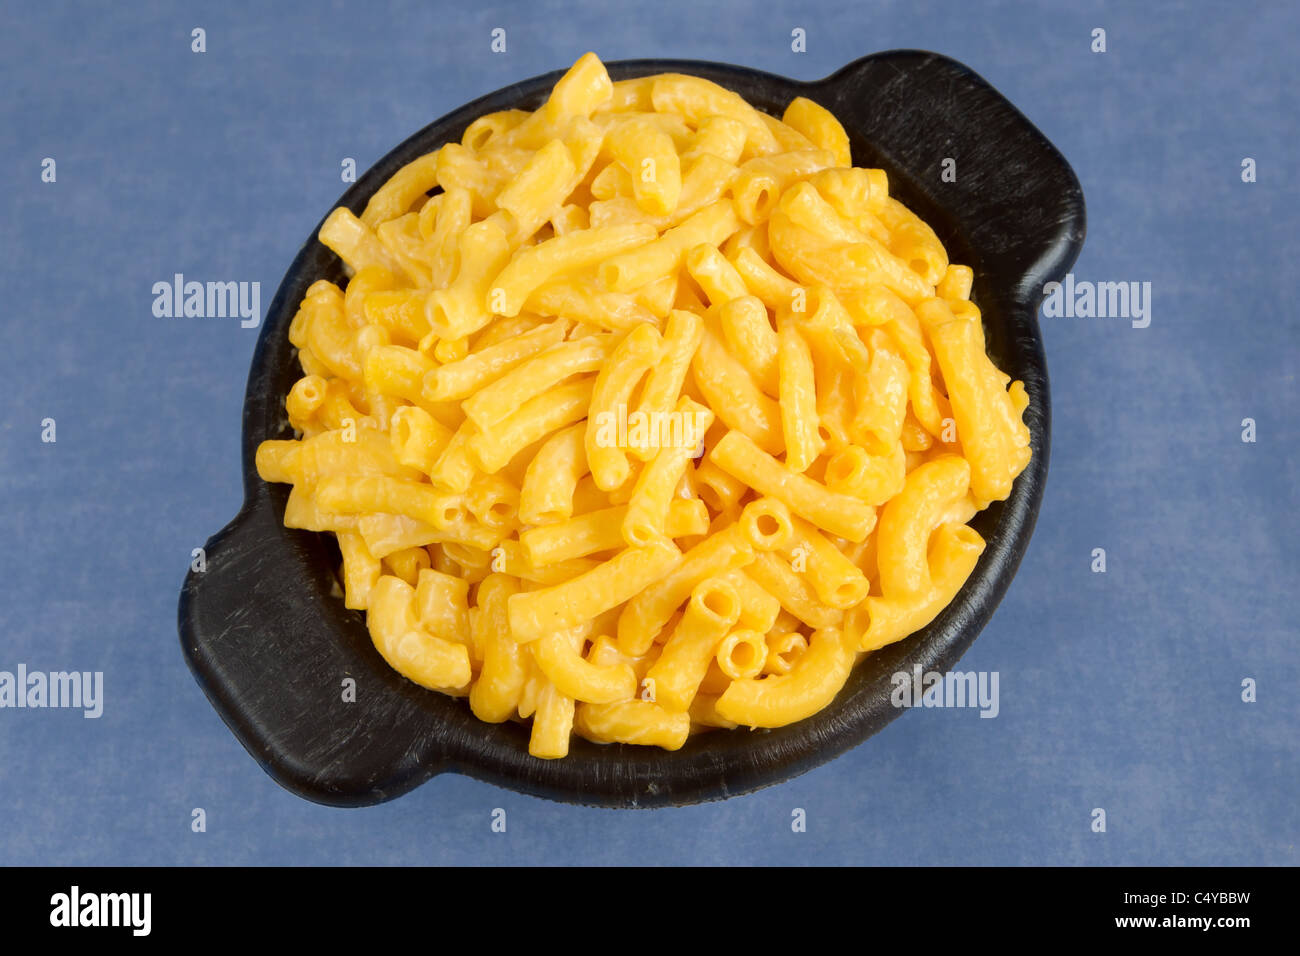 bowl of macaroni and cheese over a blue background Stock Photo